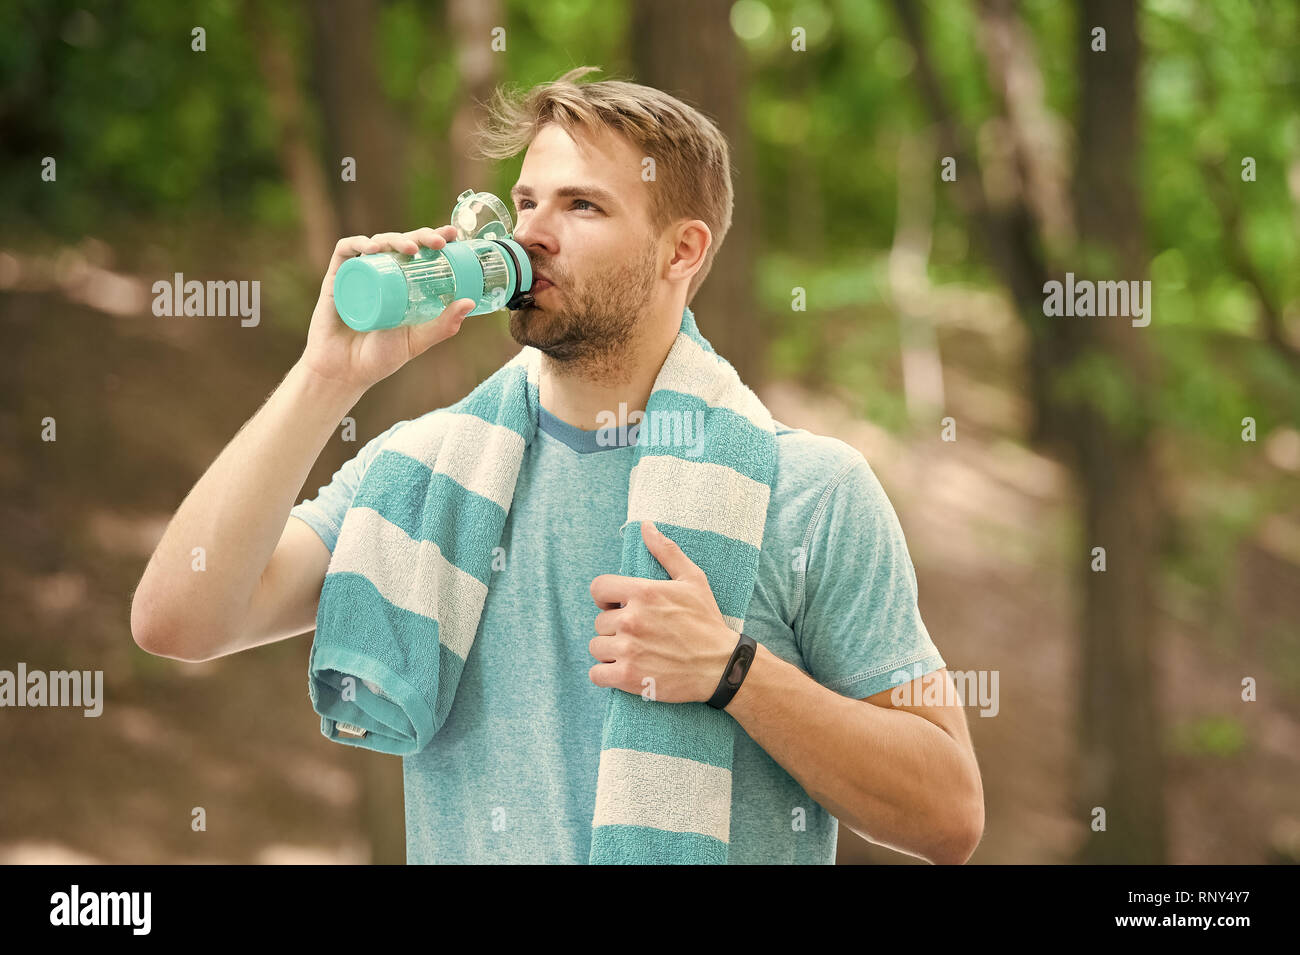 https://c8.alamy.com/comp/RNY4Y7/man-with-athletic-appearance-holds-bottle-with-water-sport-and-healthy-lifestyle-concept-athlete-drink-water-after-training-at-stadium-on-sunny-day-man-athlete-in-sporty-clothes-training-outdoor-RNY4Y7.jpg